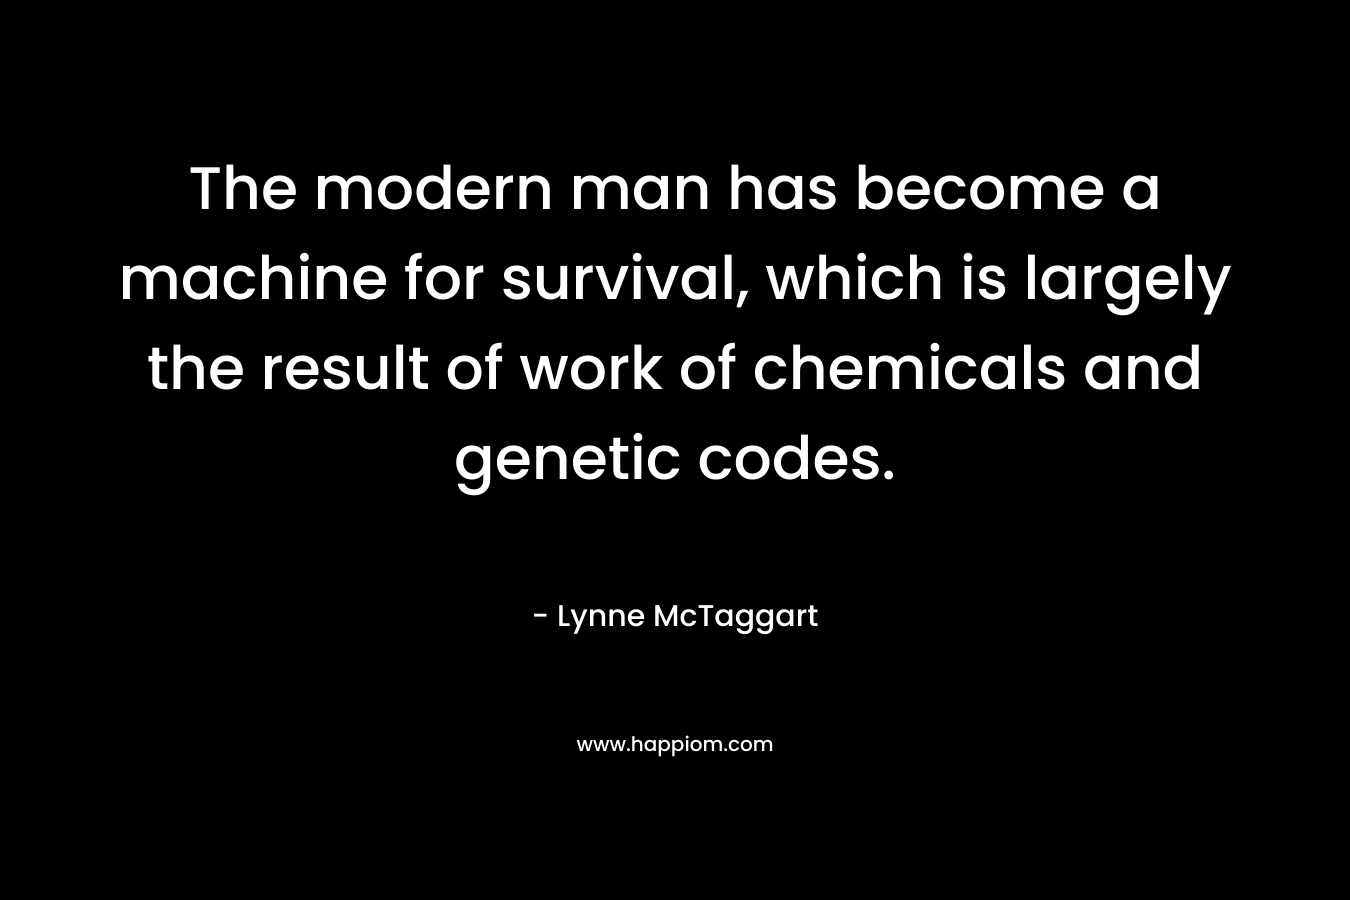 The modern man has become a machine for survival, which is largely the result of work of chemicals and genetic codes.